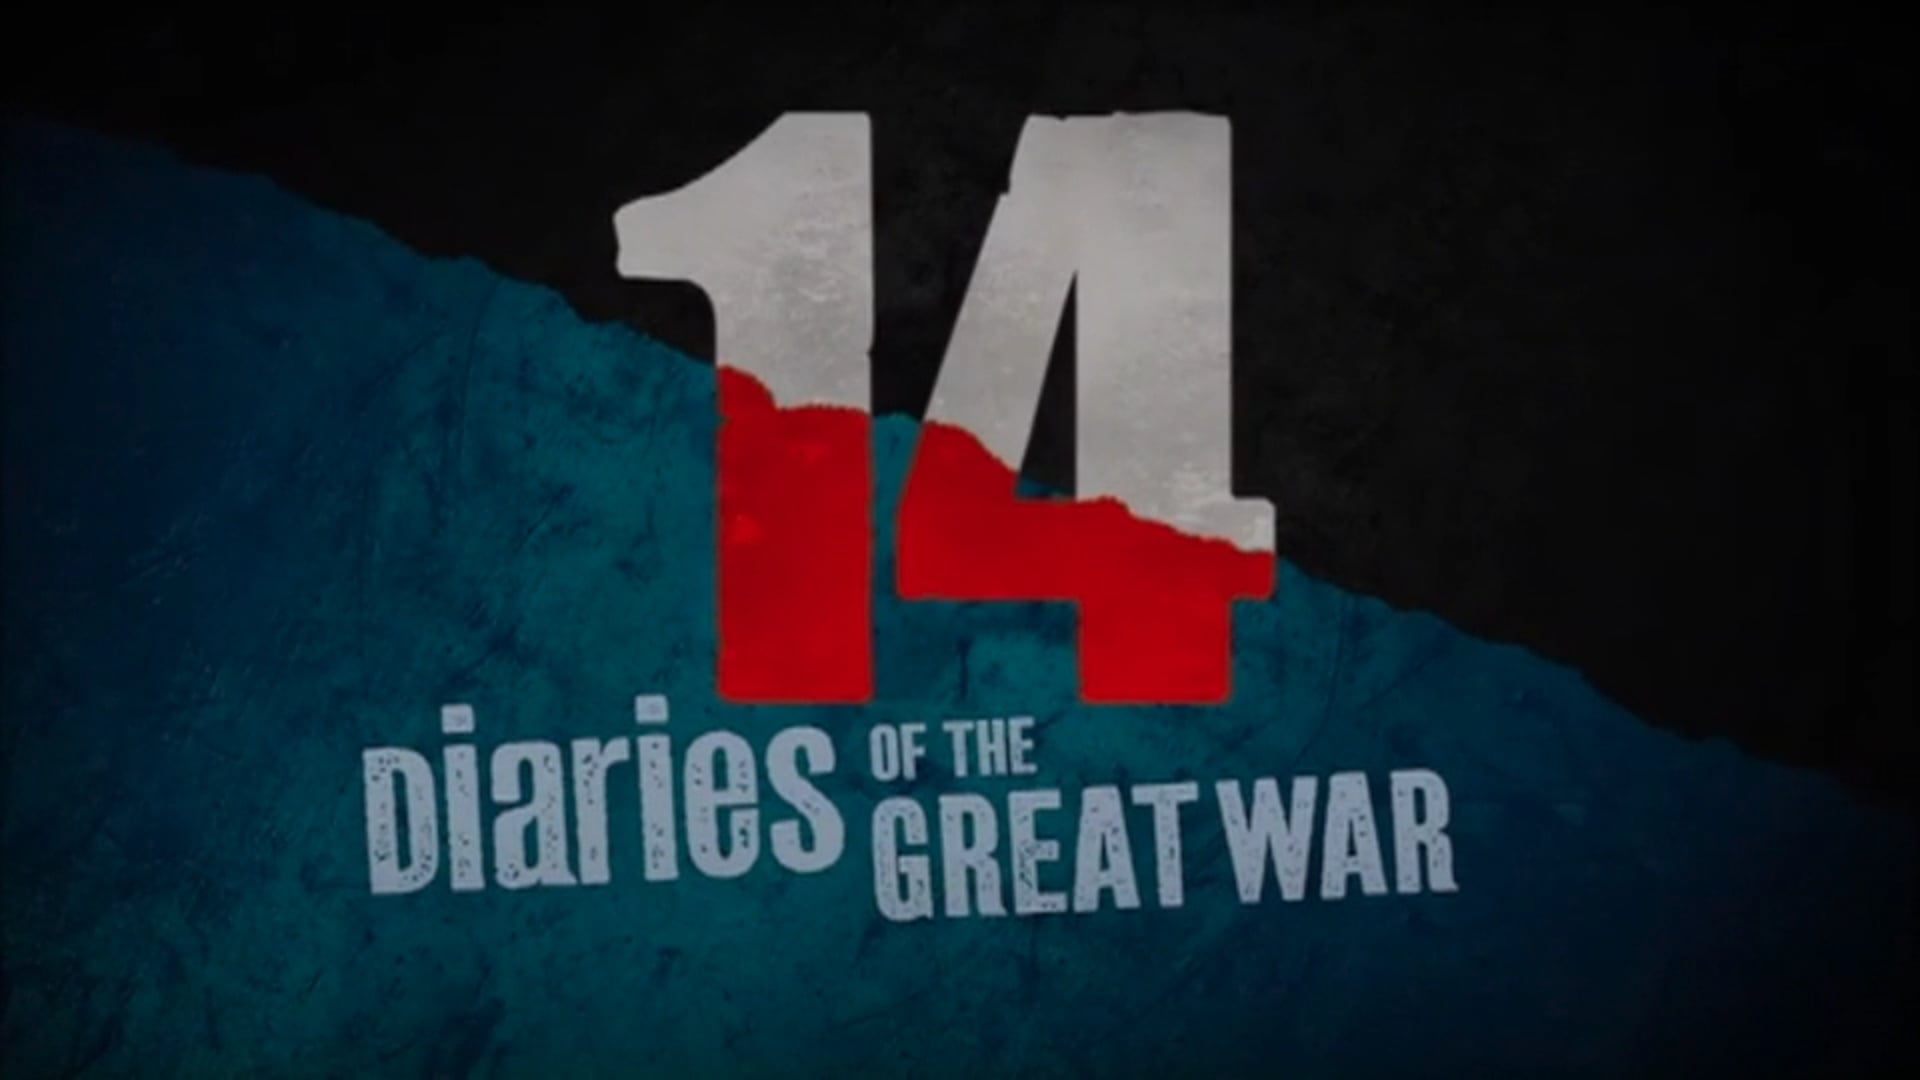 BBC - 14 Diaries of the Great War